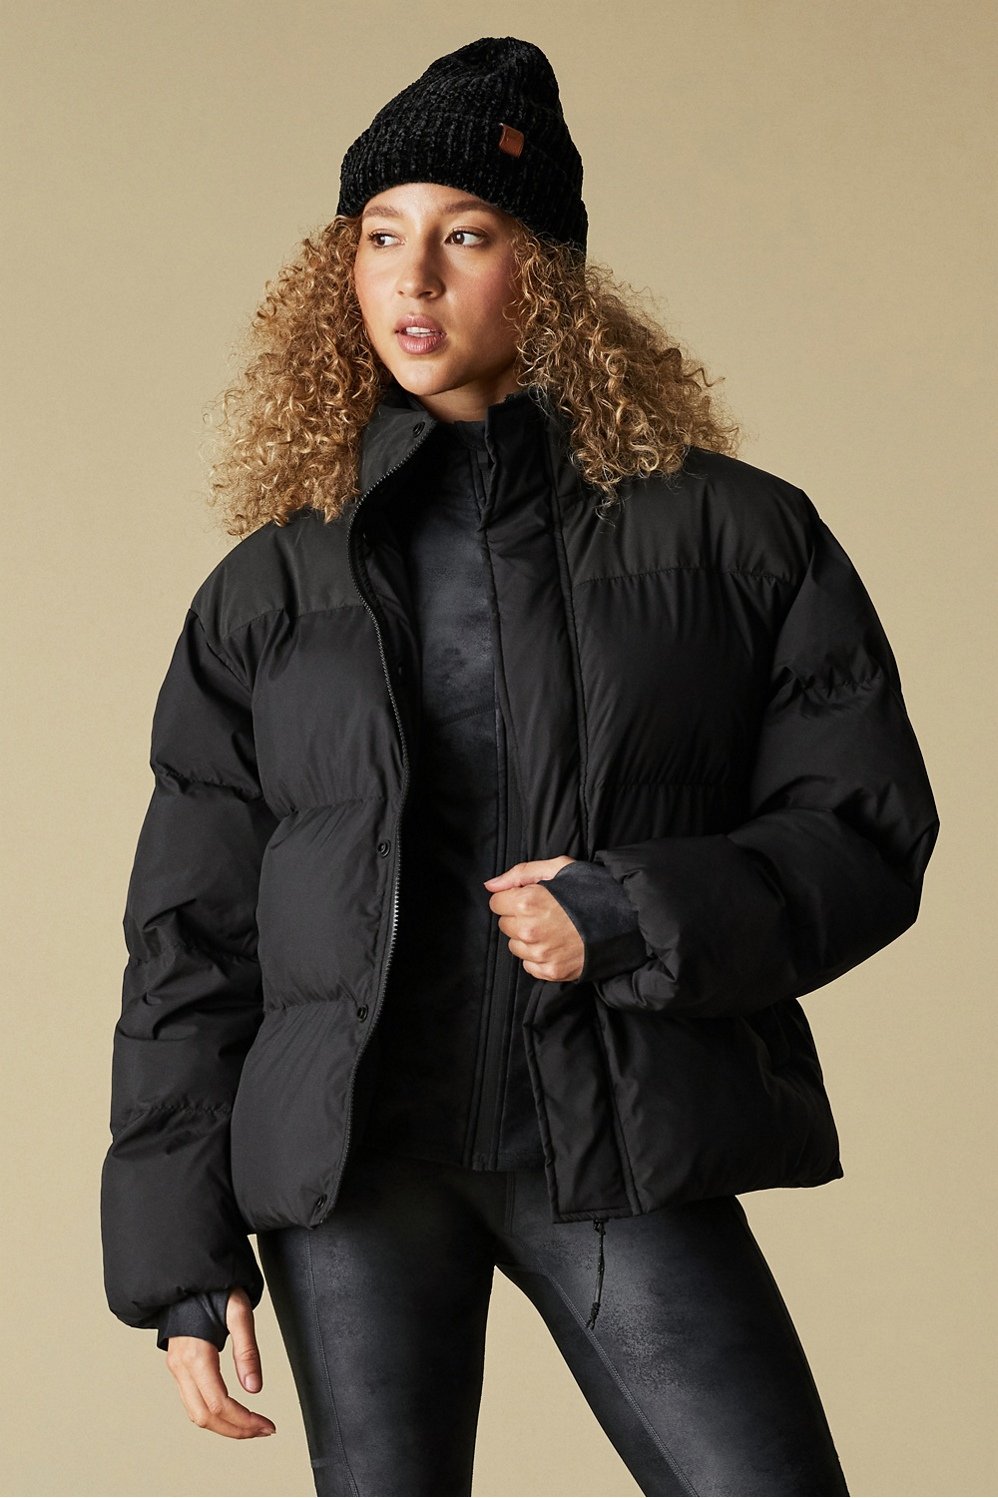 Fabletics Womens Jacket Size S Black Hooded Weather Resistant Giana Jacket  - $35 - From Raynika